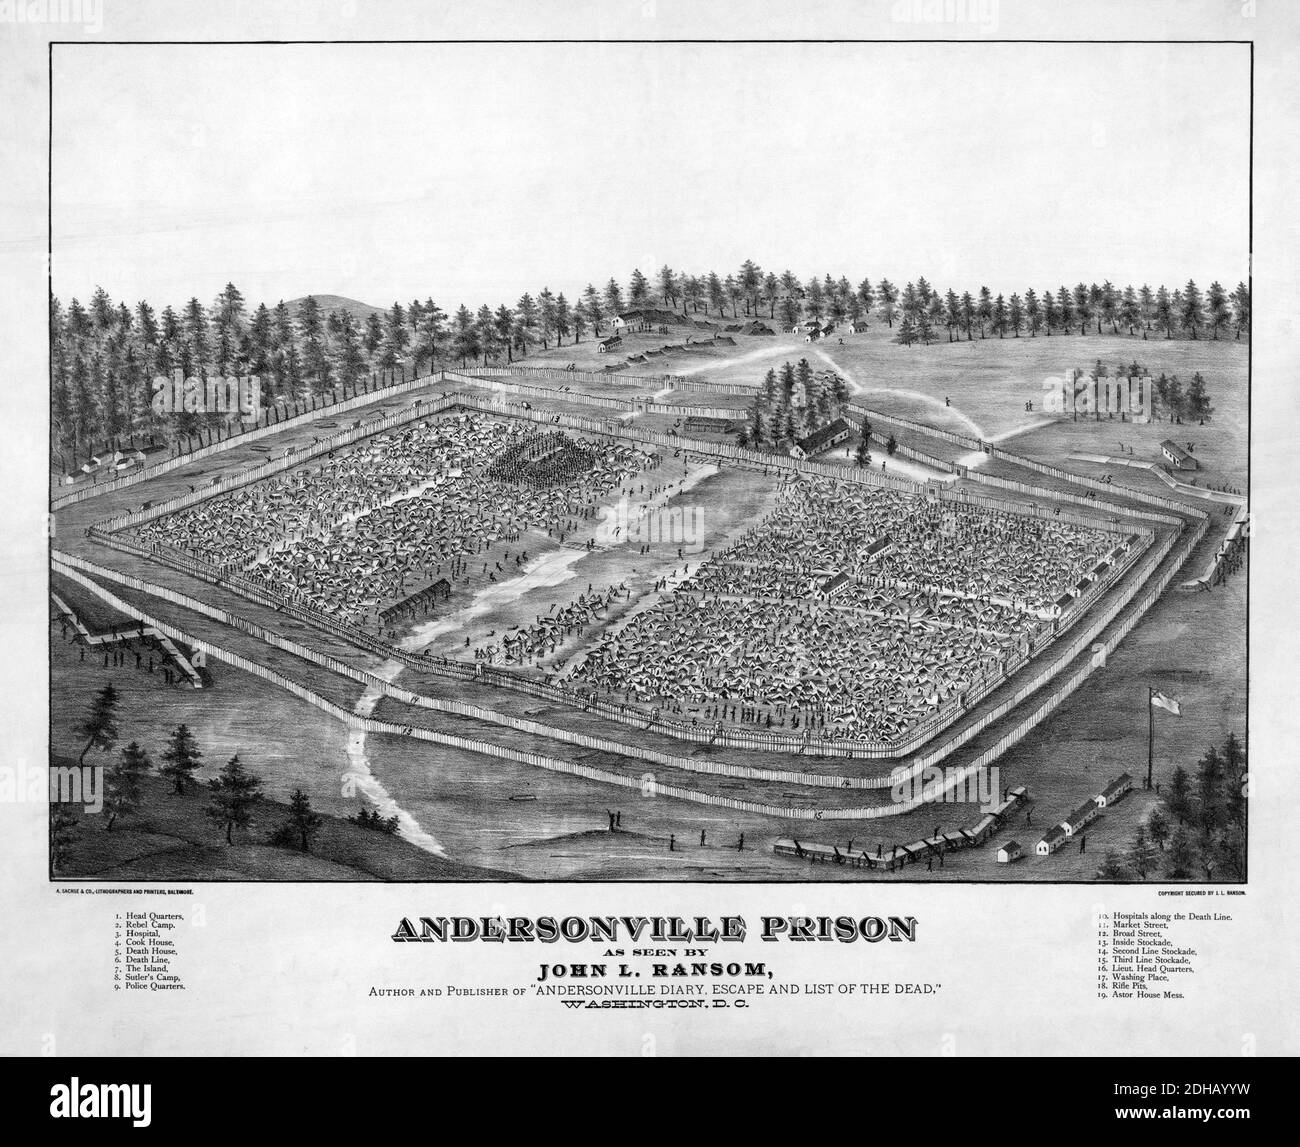 A sketch of Andersonville Prison by John L. Ransom, author of Andersonville Diary, Escape and List of the Dead.  Areas of the sketch are numbered, the labels at the bottom are transcribed below:  1. Head Quarters, 2. Rebel Camp. 3. Hospital, 4. Cook House, 5. Death House, 6. Death Line, 7. The Island, 8. Sutler's Camp, 9. Police Quarters.   10. Hospitals along the Death Line. 11. Market Street, 12. Broad Street, 13. Inside Stockade, 14. Second Line Stockade, 15. Third Line Stockade, 16. Lieut. Head Quarters, 17. Washing Place, 18. Rifle Pits, 19. Astor House Mess. Stock Photo